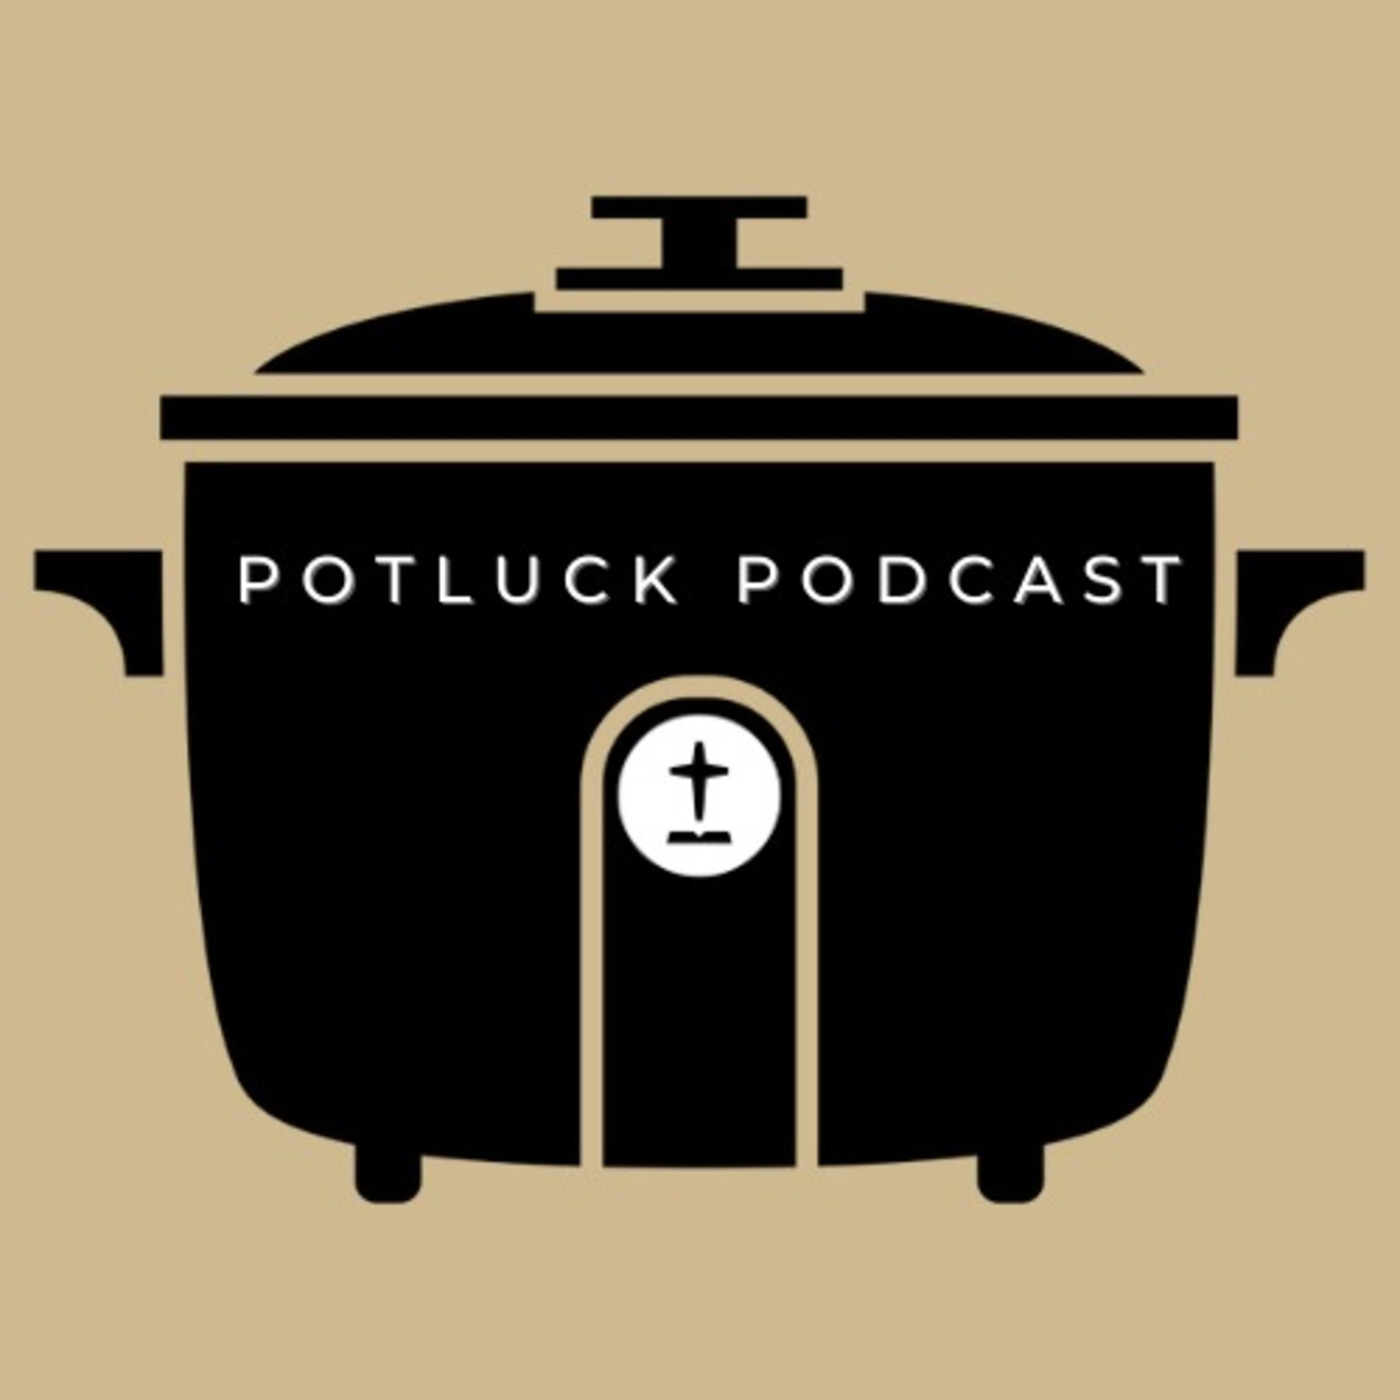 Episode 273: POTLUCK PODCAST 195: IMB in Ukraine, Willy Rice Nomination, and Mudding